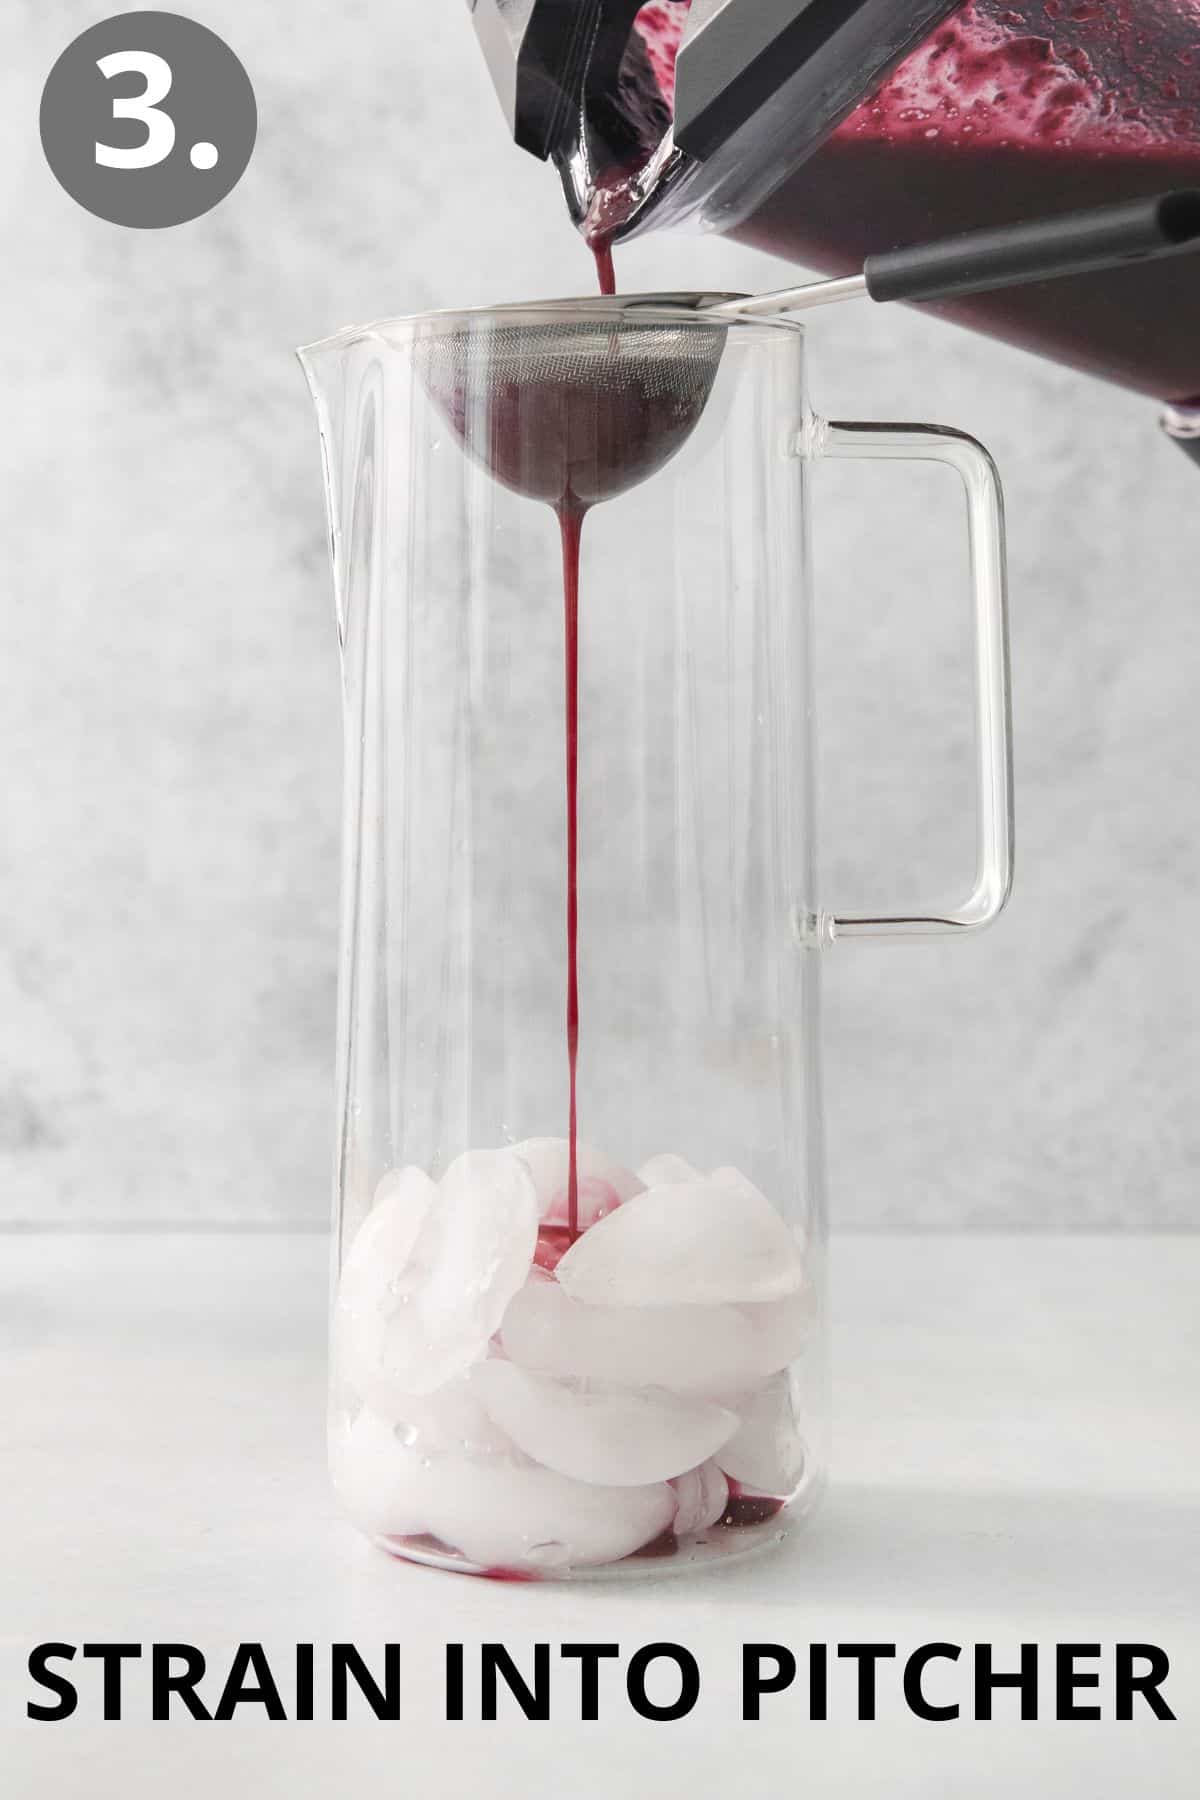 A hand pouring the berry concentrate through a strainer and into a glass pitcher